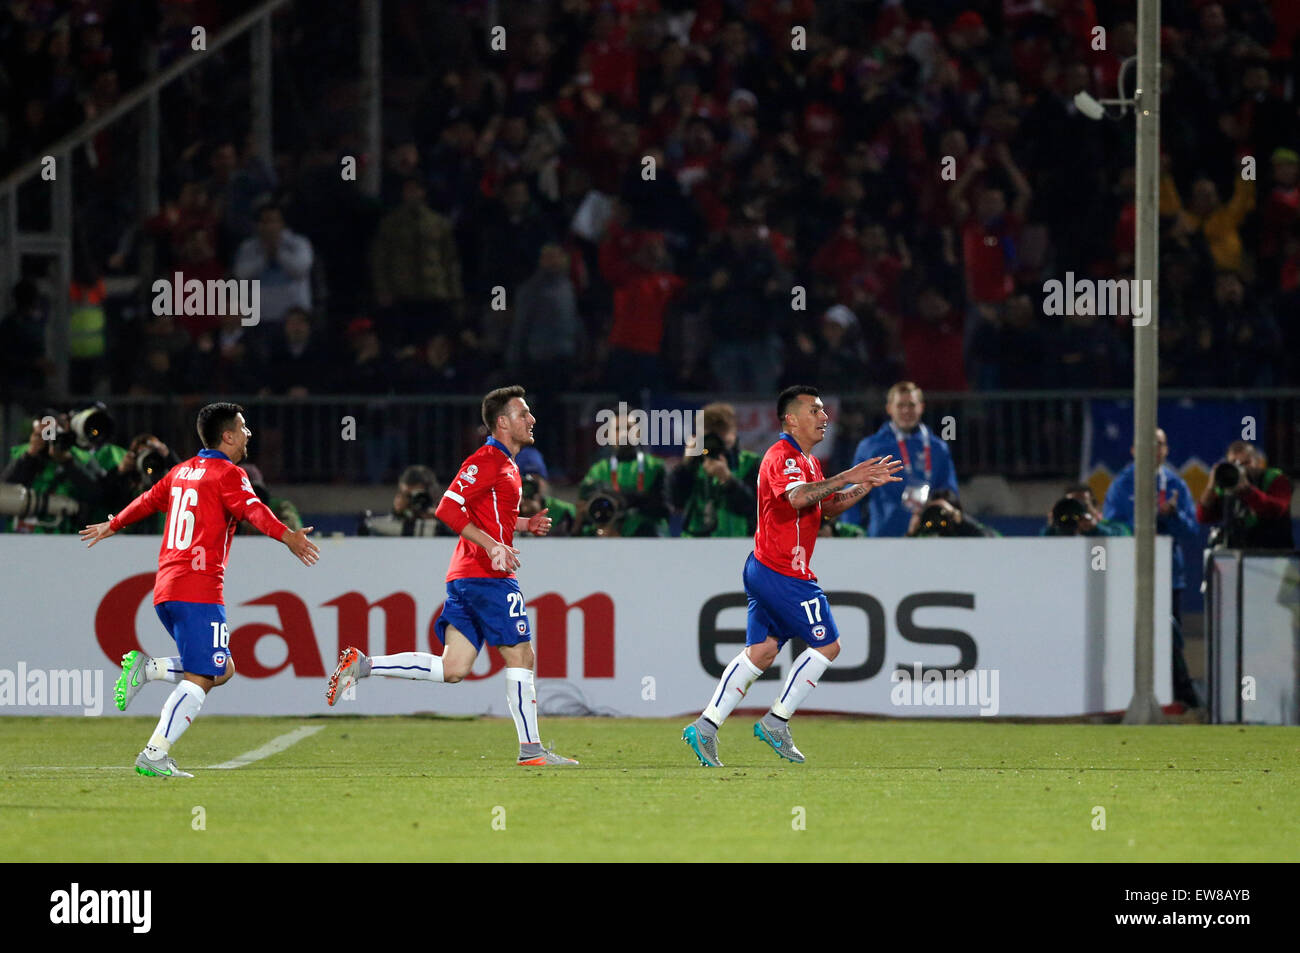 Santiago, Chile. 19th June, 2015. Chile's Gary Medel (R) celebrates his score during the Group A match of the Copa America Chile 2015, against Bolivia, held in the National Stadium, in Santiago, Chile, on June 19, 2015. Chile won 5-0. Credit:  Guillermo Arias/Xinhua/Alamy Live News Stock Photo